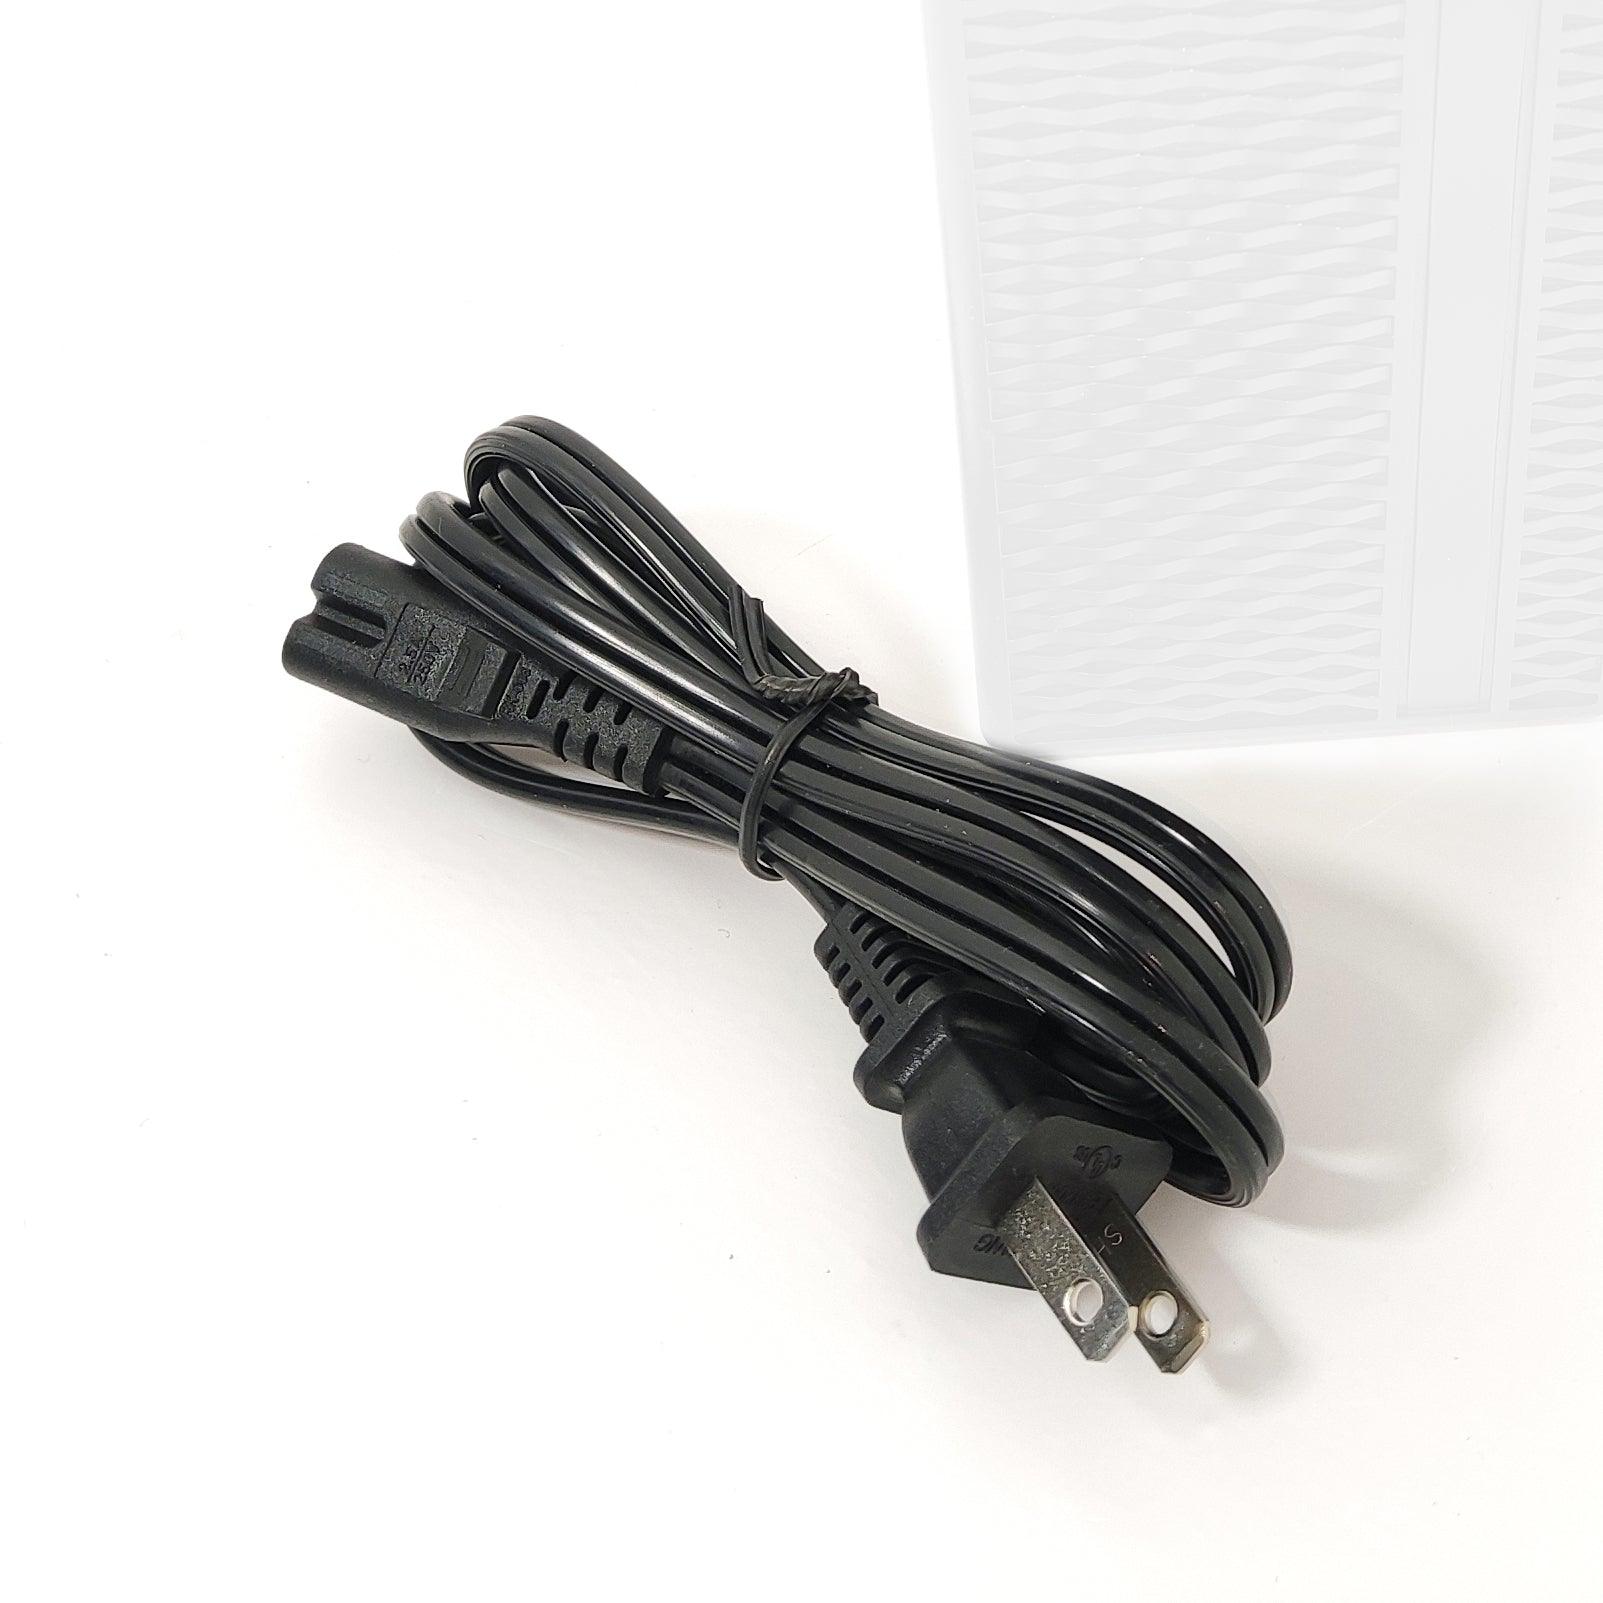 Charger power cord